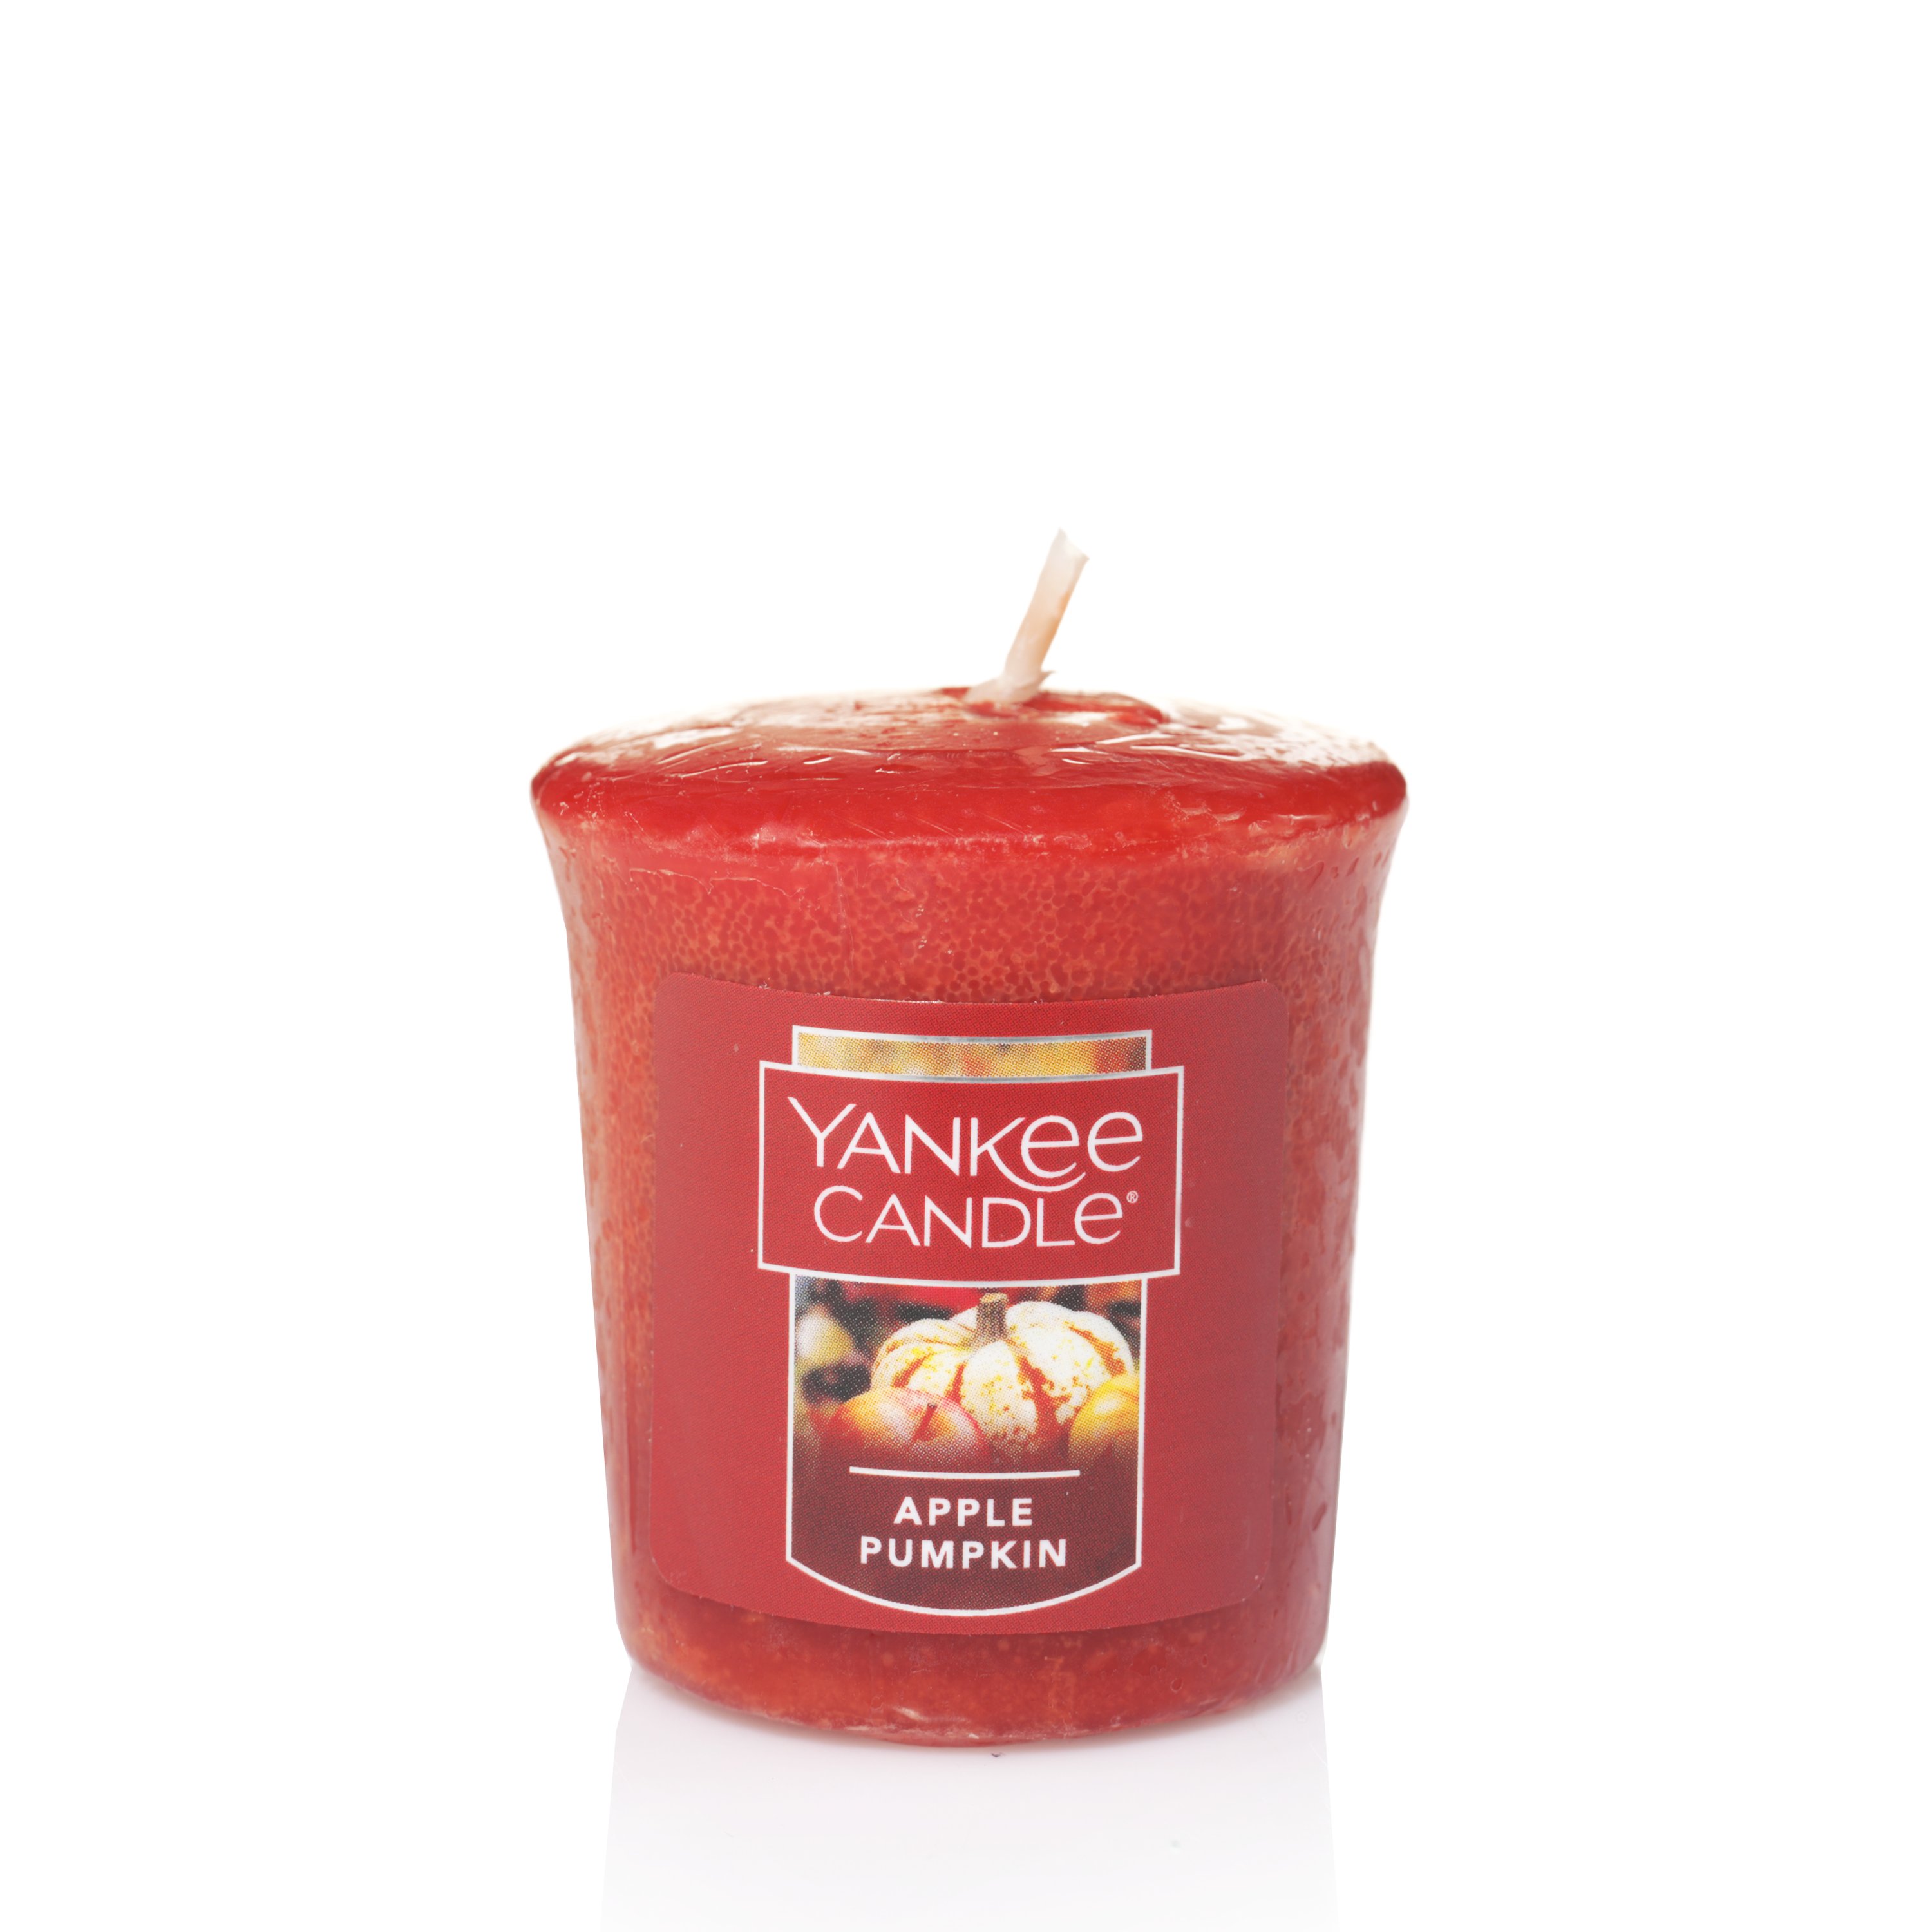 CHERRIES ON SNOW Lot of 6 Wax Red Fruit Melt New Yankee Candle Votive Candles 